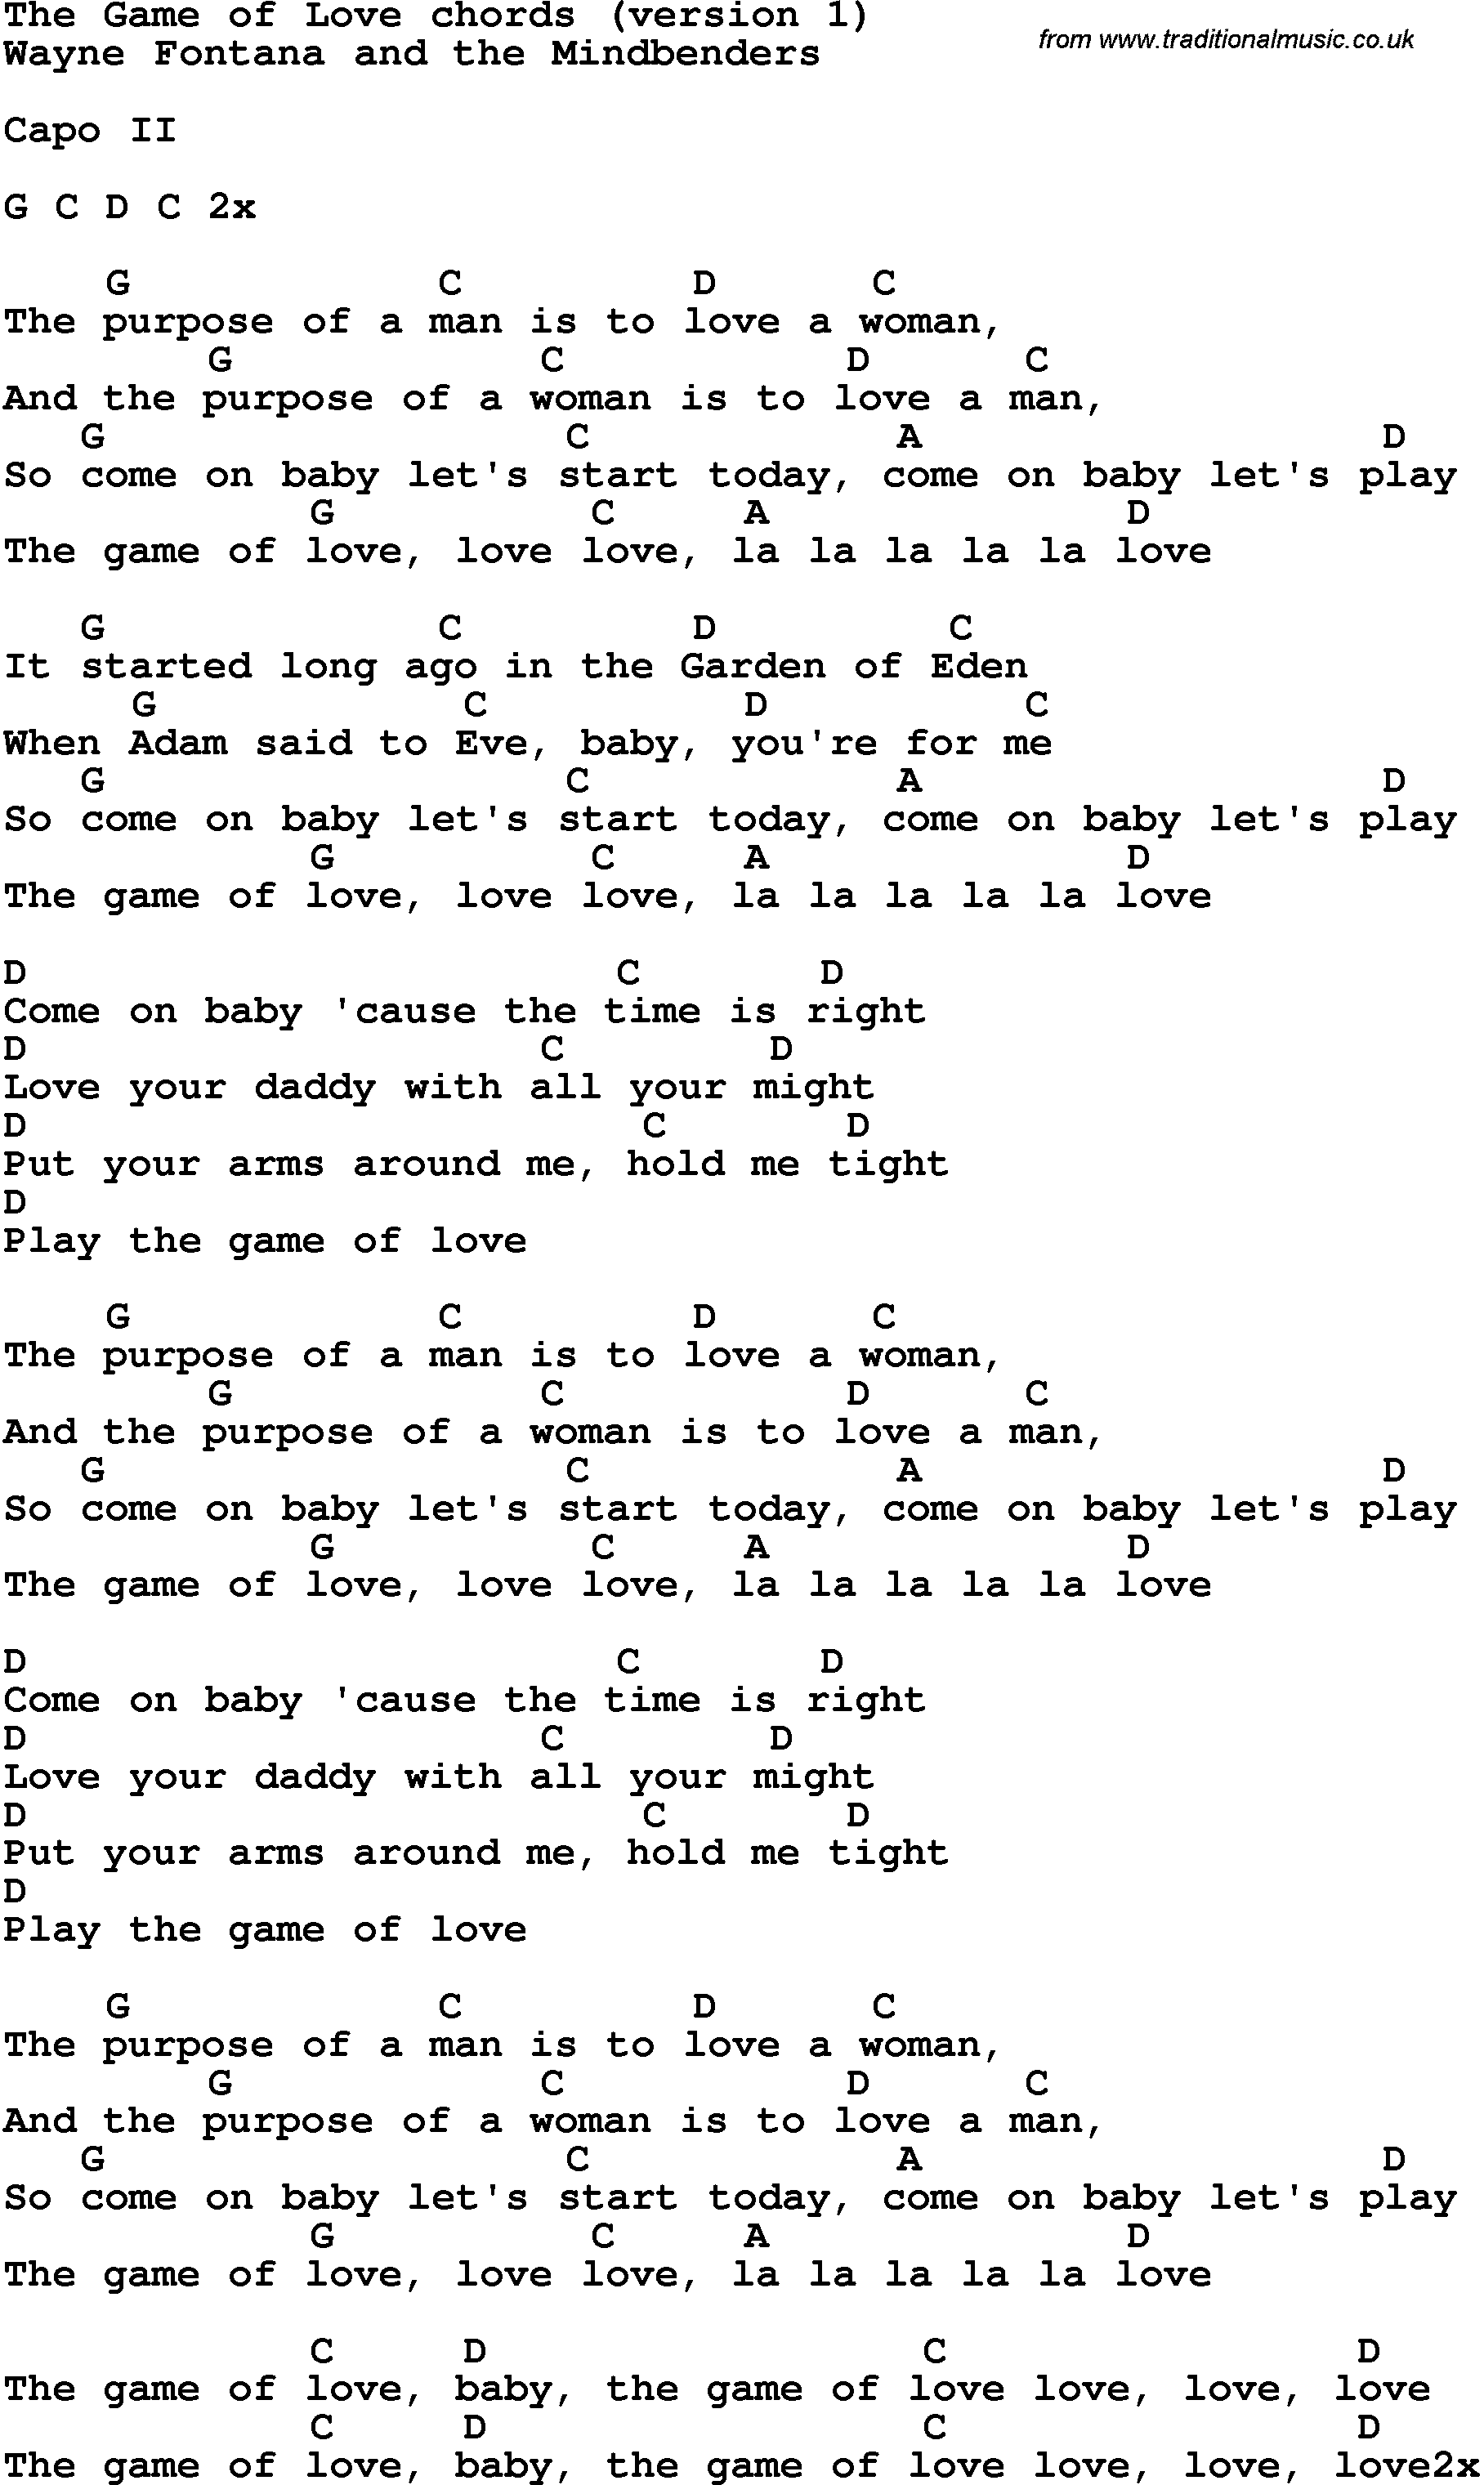 Song lyrics with guitar chords for The Game Of Love